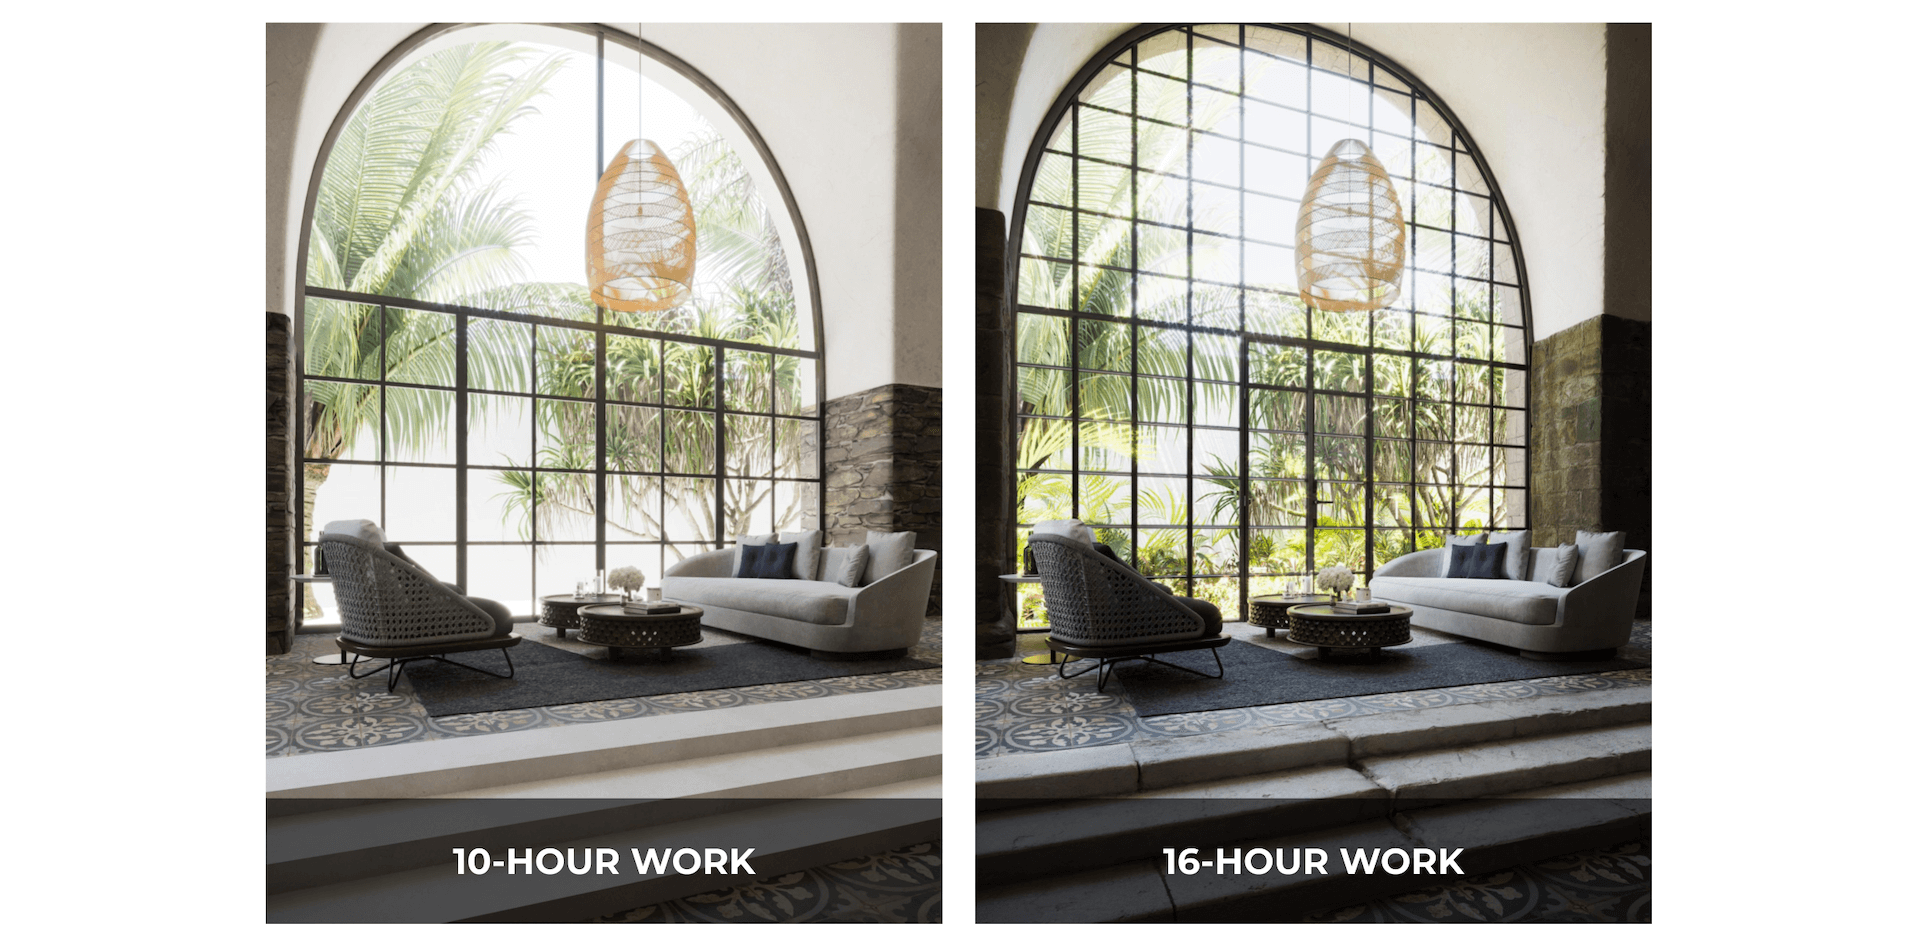 3D Render Quality Difference with Different Timeframes